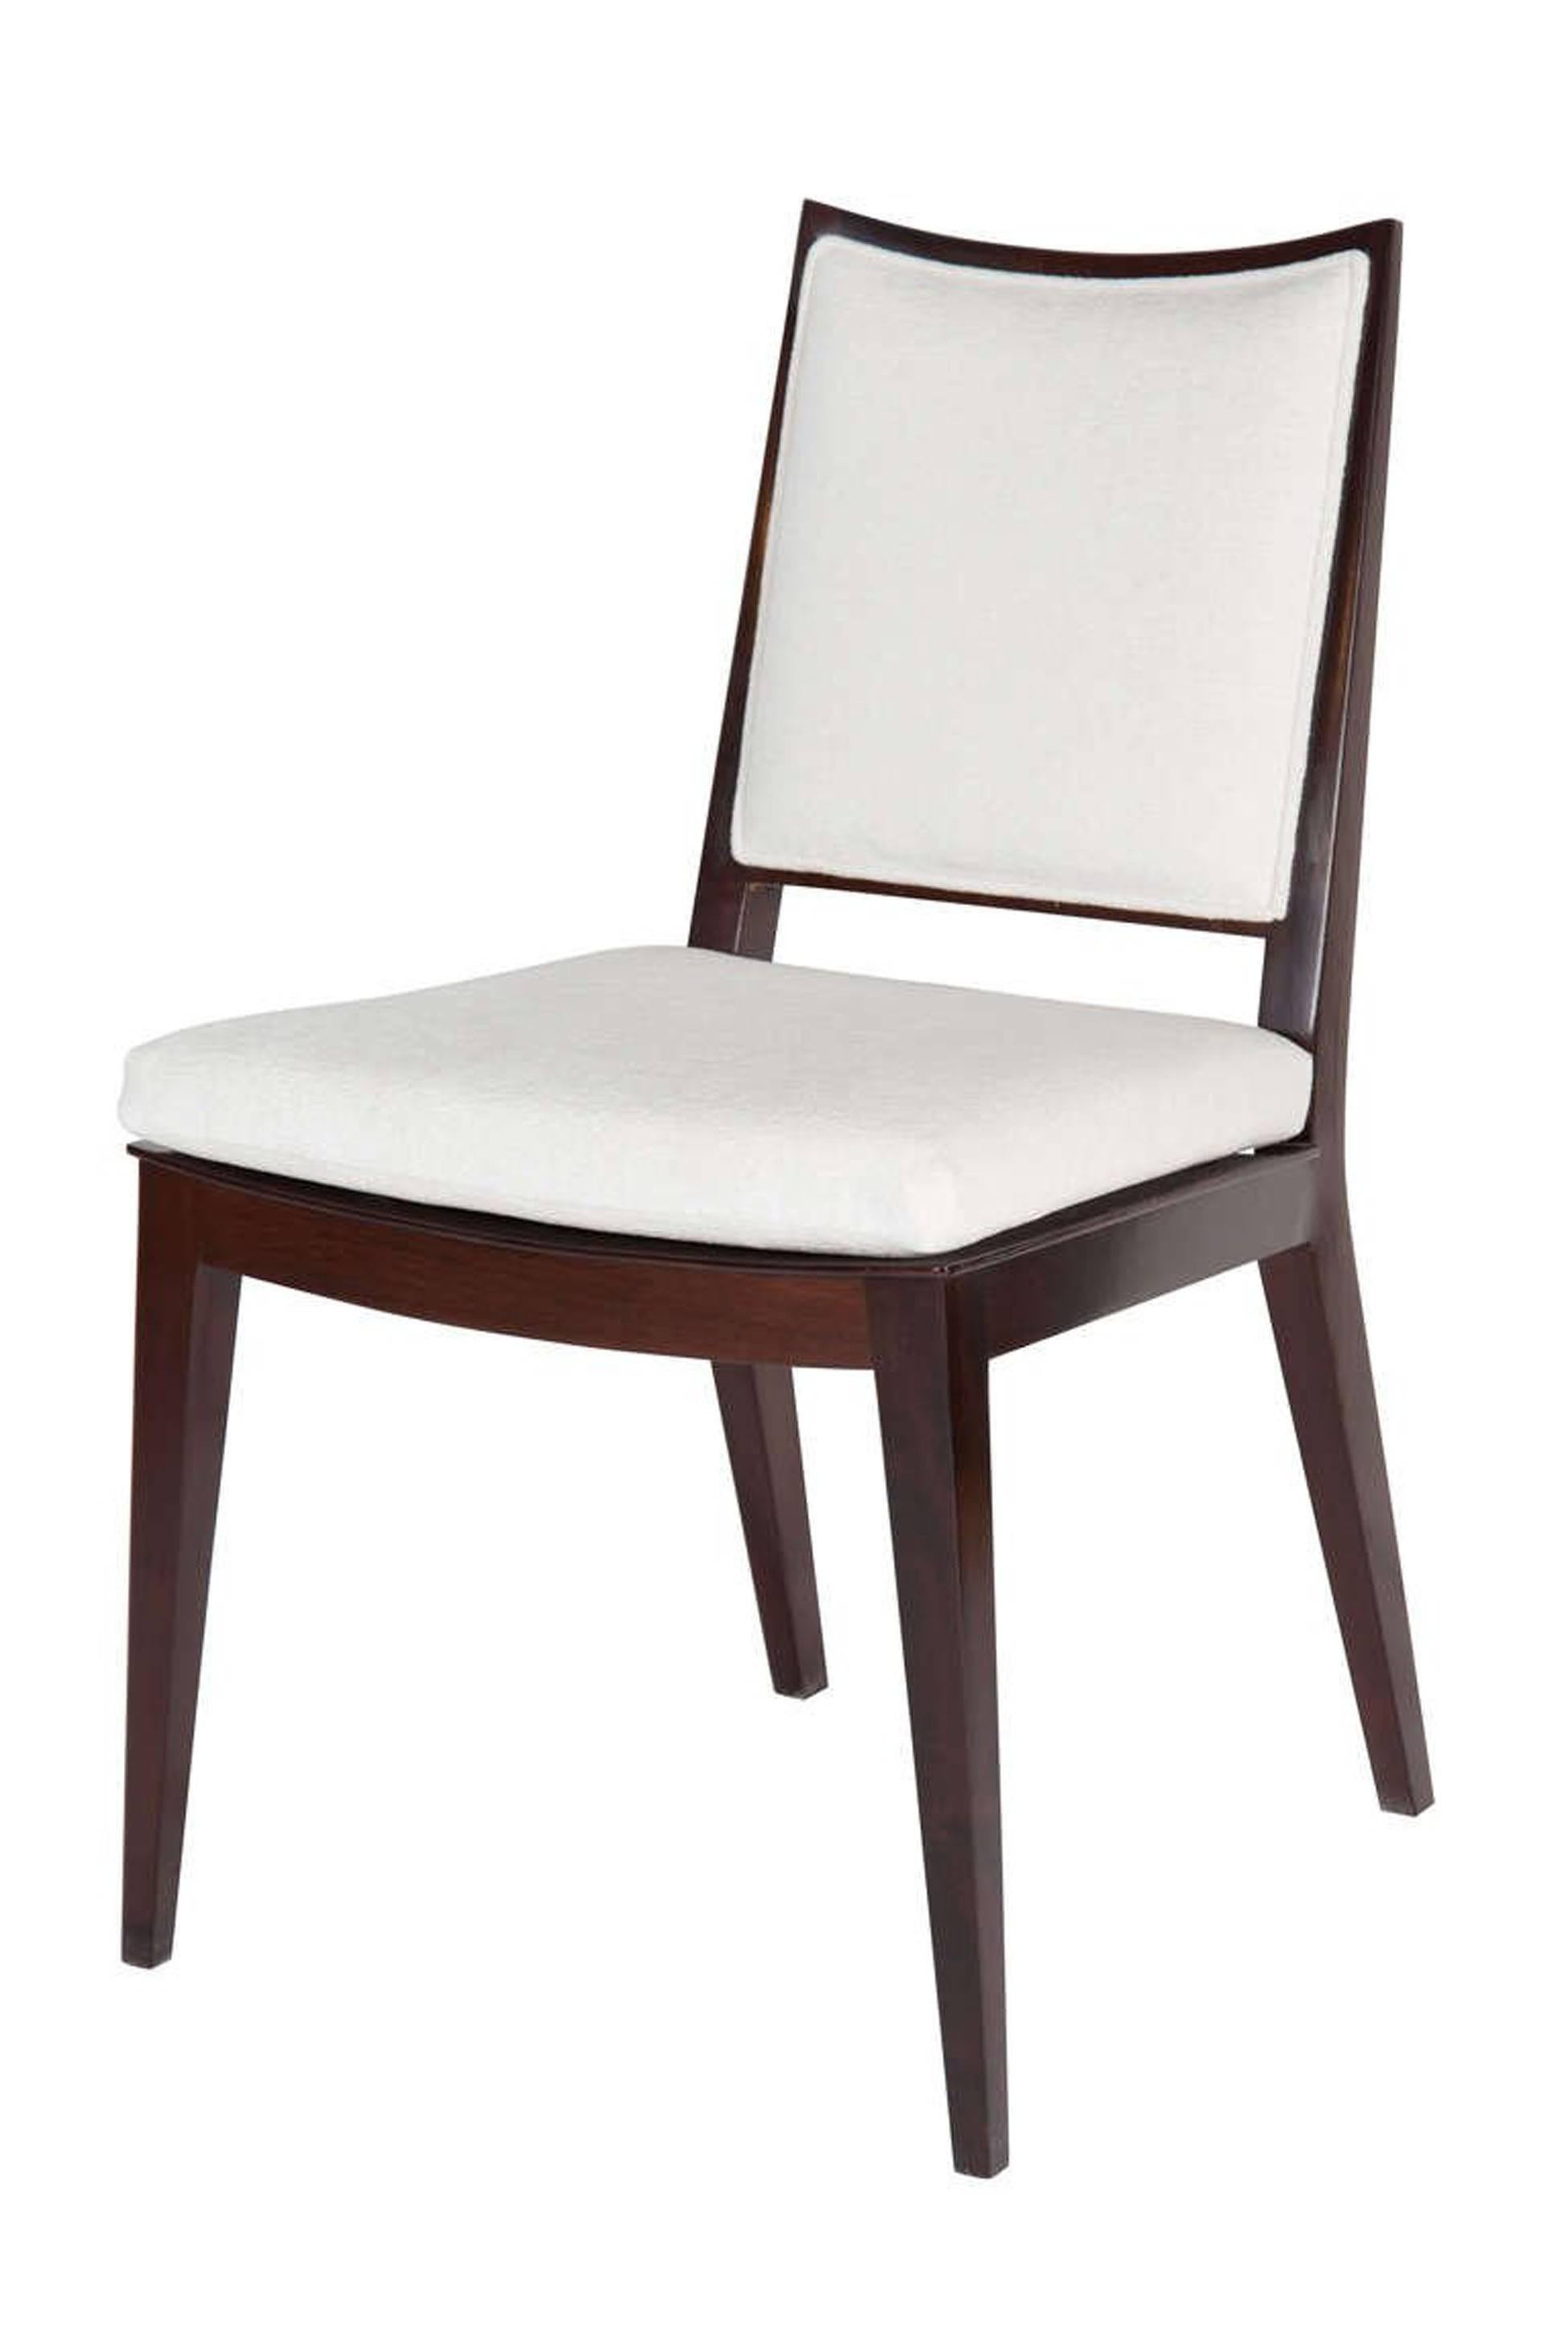 Solid Mahogany frame back dining chair. 
Measures:
Seat height19”. 
Seat depth 17.5”. 

COM requirements: 2 yards.
5% up-charge for contrasting fabrics and or welting.
COL requirements:40 sq. feet.
5% percentage up-charge for all COL or